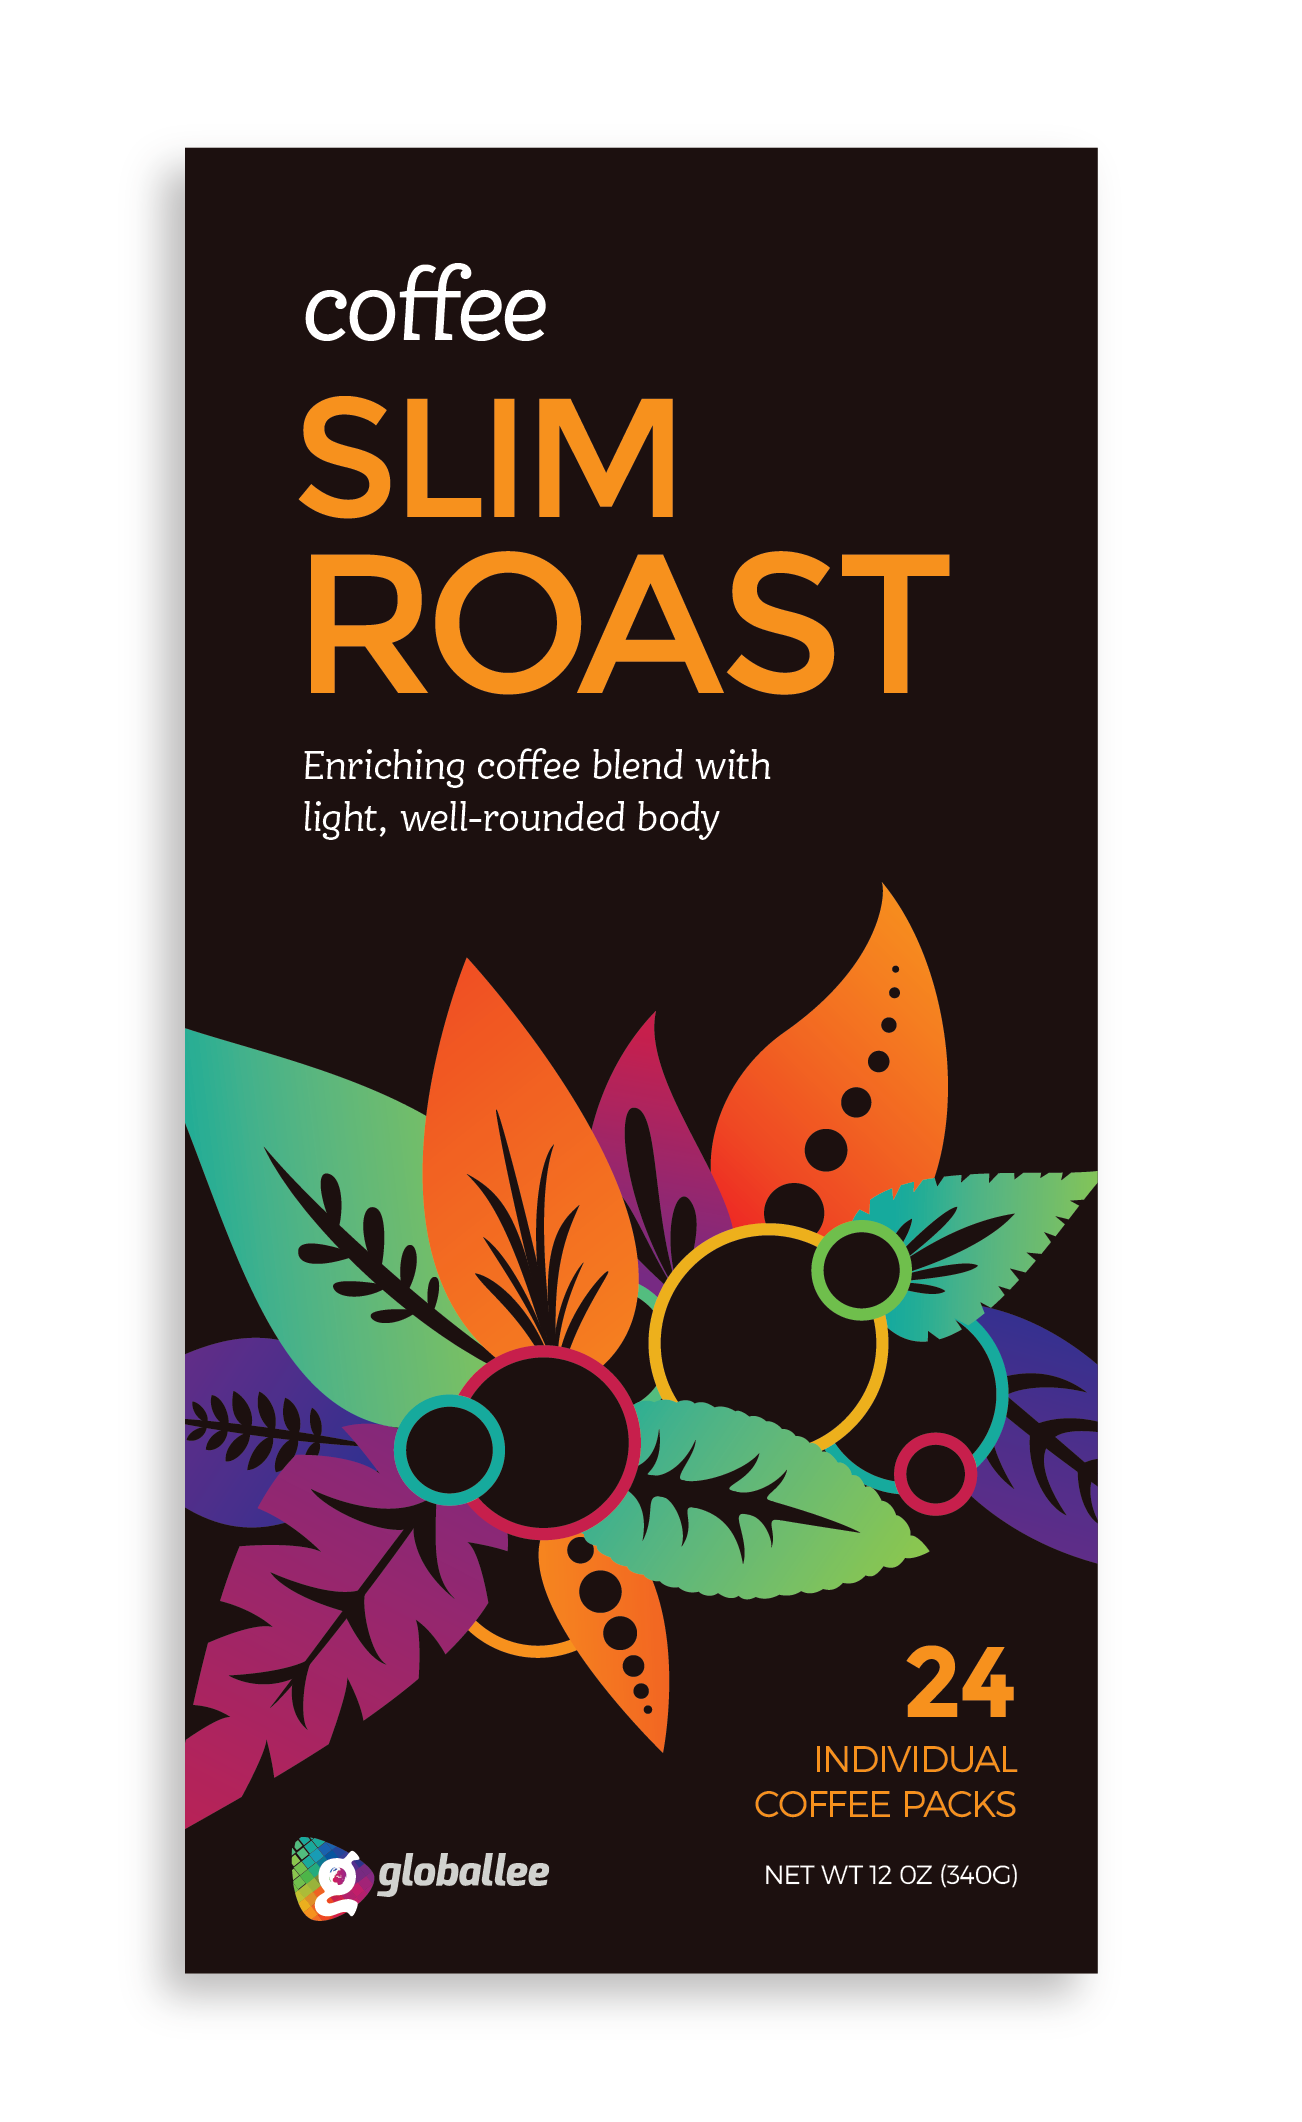 Packaging design for coffee roast